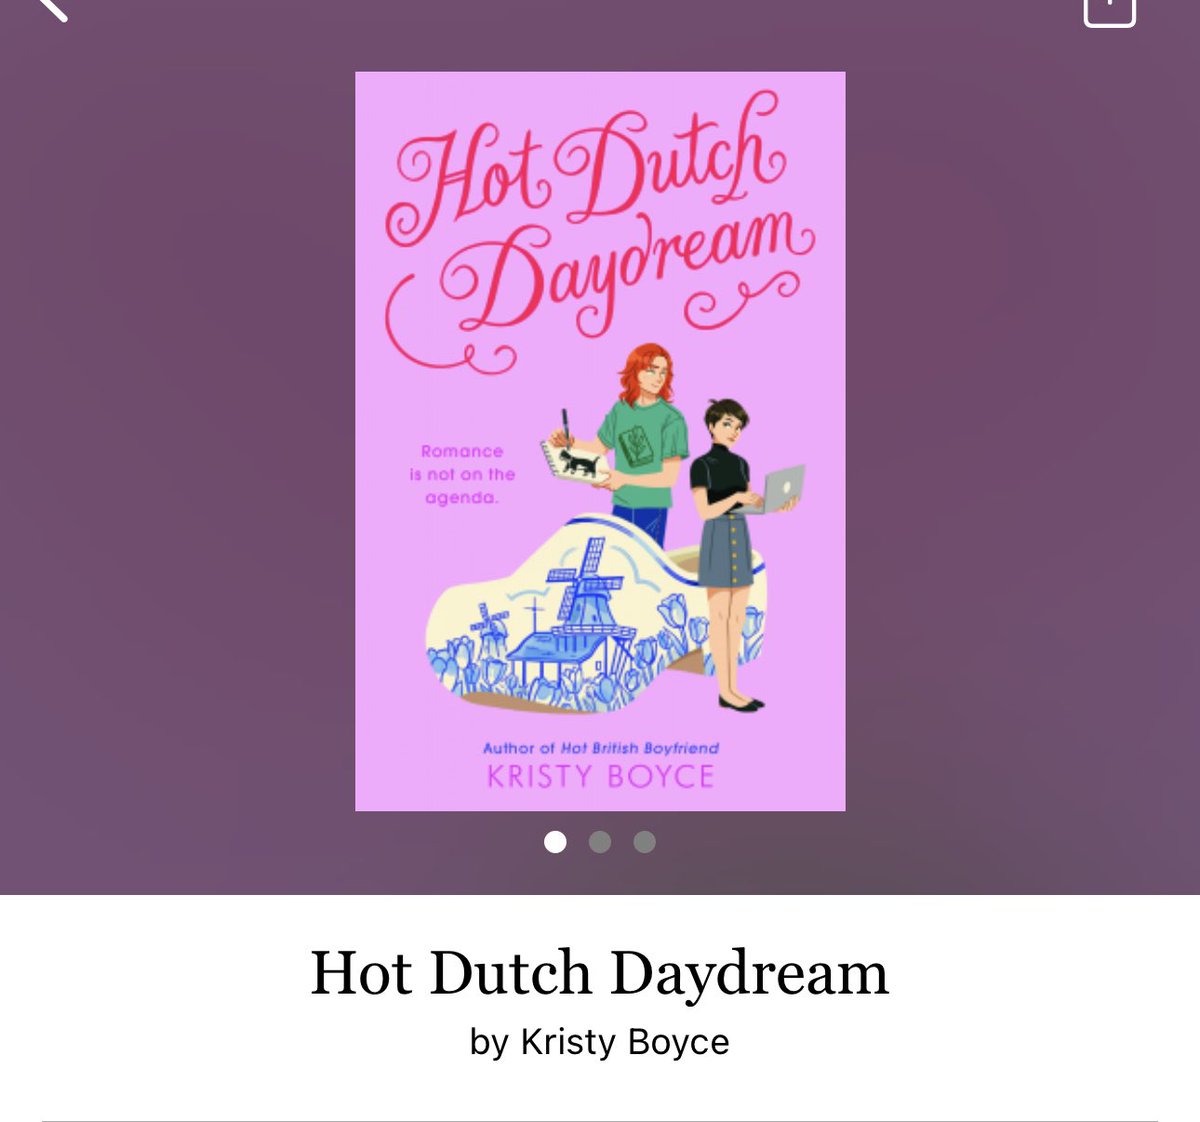 Hot Dutch Daydream by Kristy Boyce 

#HotDutchDaydream by #KristyBoyce #5023 #30chapters #304pages #566of400 #7hourAudiobook #audiobook #28for7 #FPL #SageAndRyland #June2023 #clearingoffreadingshelves #whatsnext #readiitquick